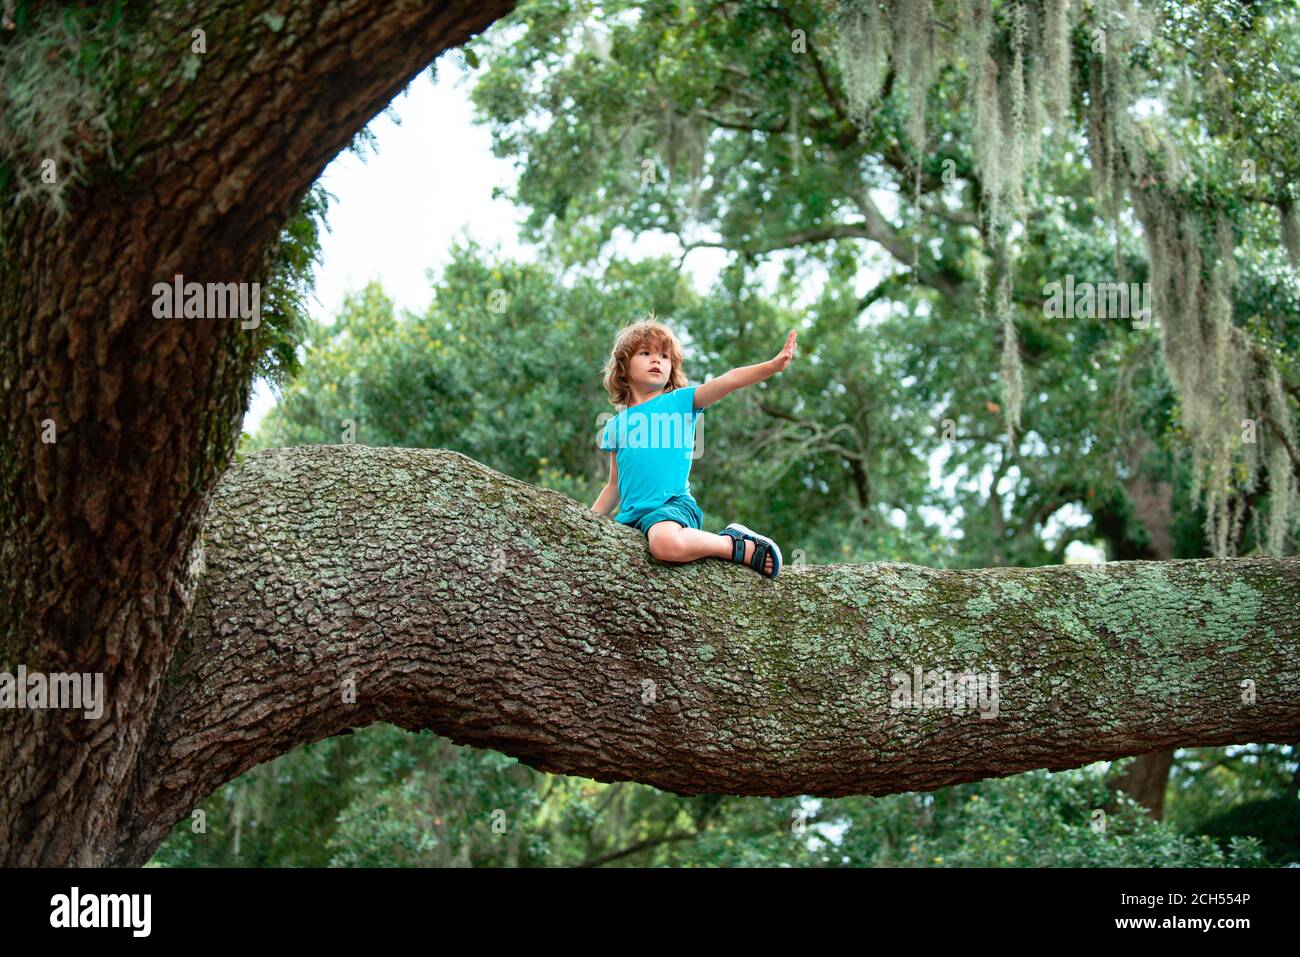 Kids climbing trees. Toddler child learning to climb having fun in park. Stock Photo